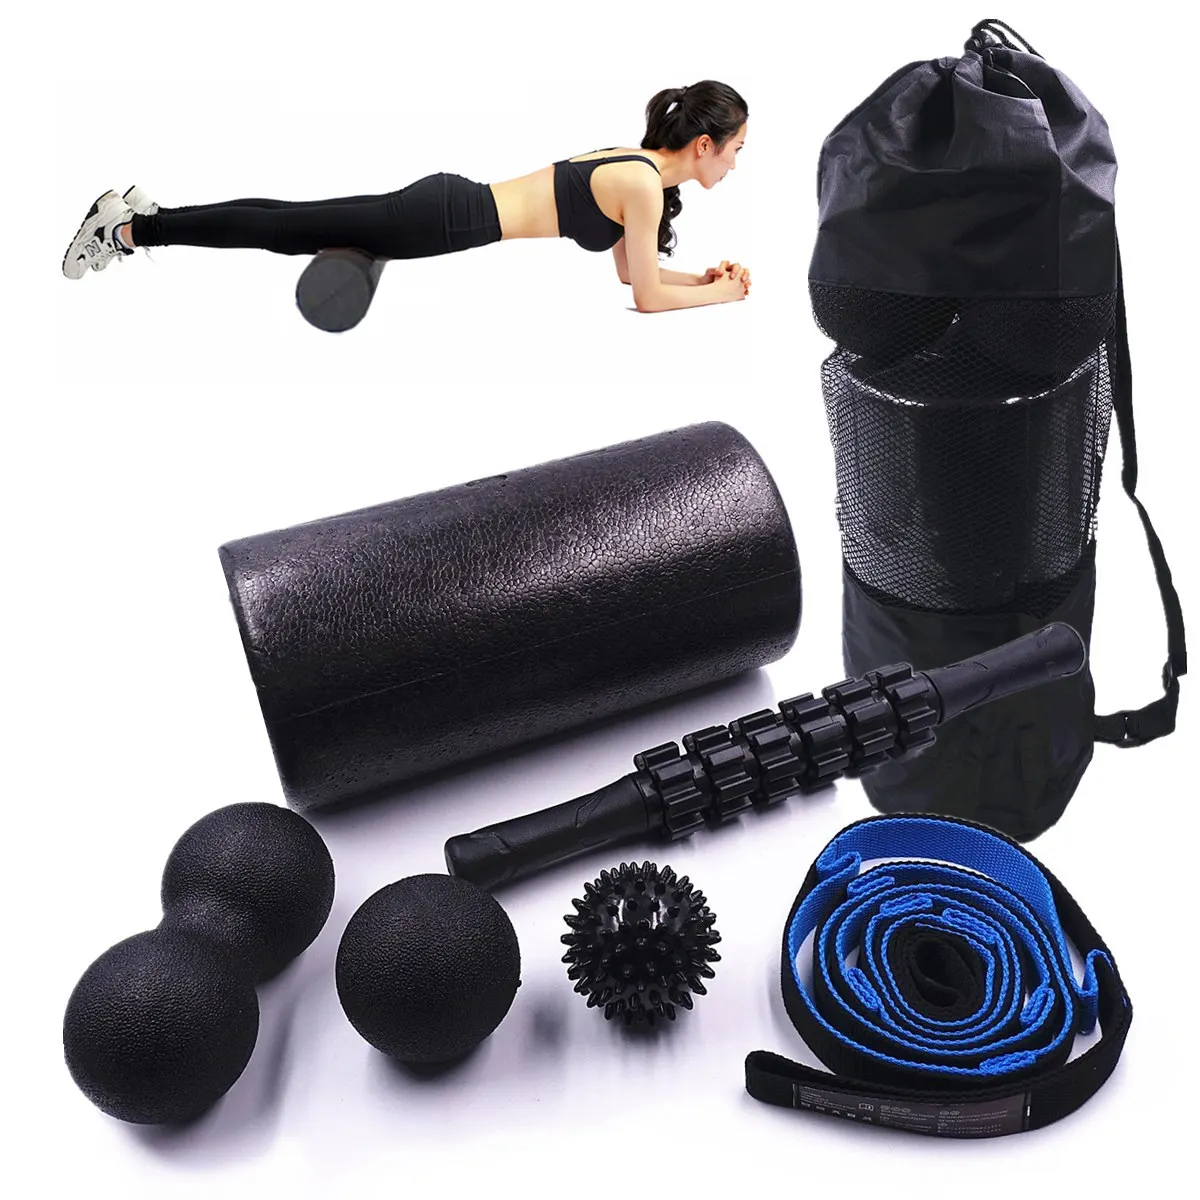 Black Generico 5 in1 Foam Roller Set Including Foam Roller with End Caps Double Peanut Massage Ball Muscle Roller Stick for Relief Muscle Soreness Stretching Strap and Lacrosse Ball 